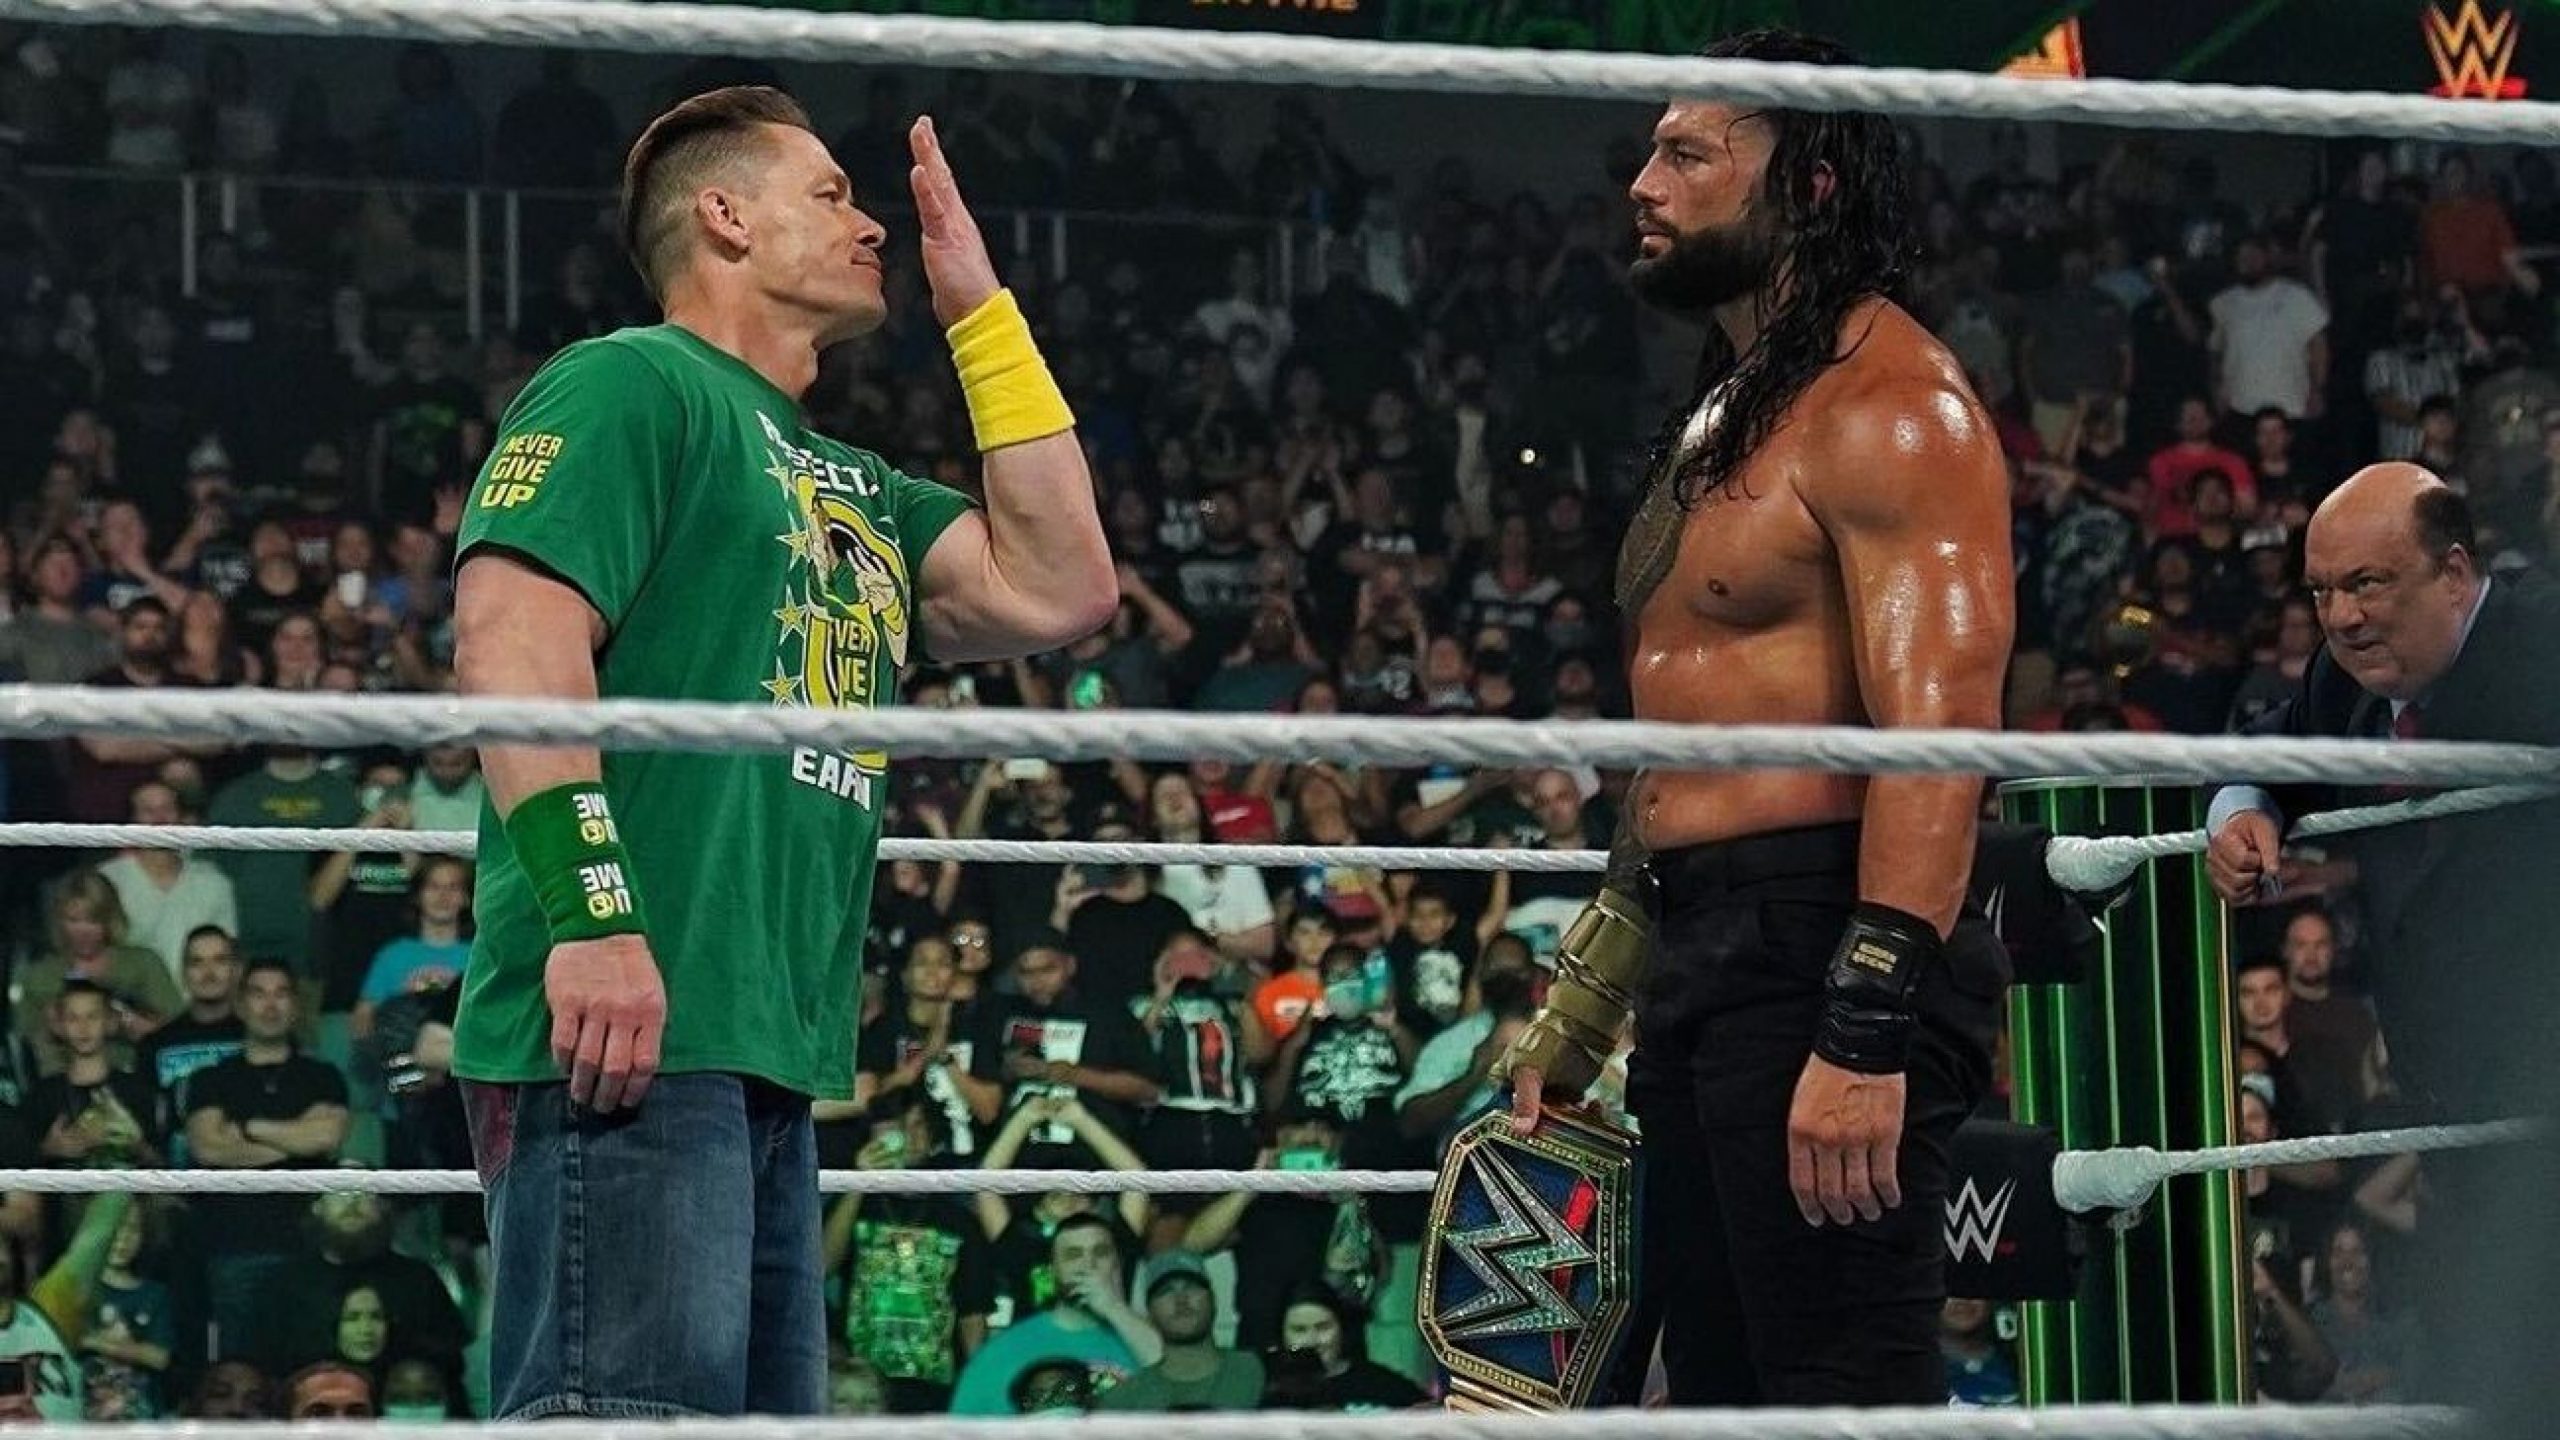 Cena is back, Big E and Nikki A.S.H. win briefcases